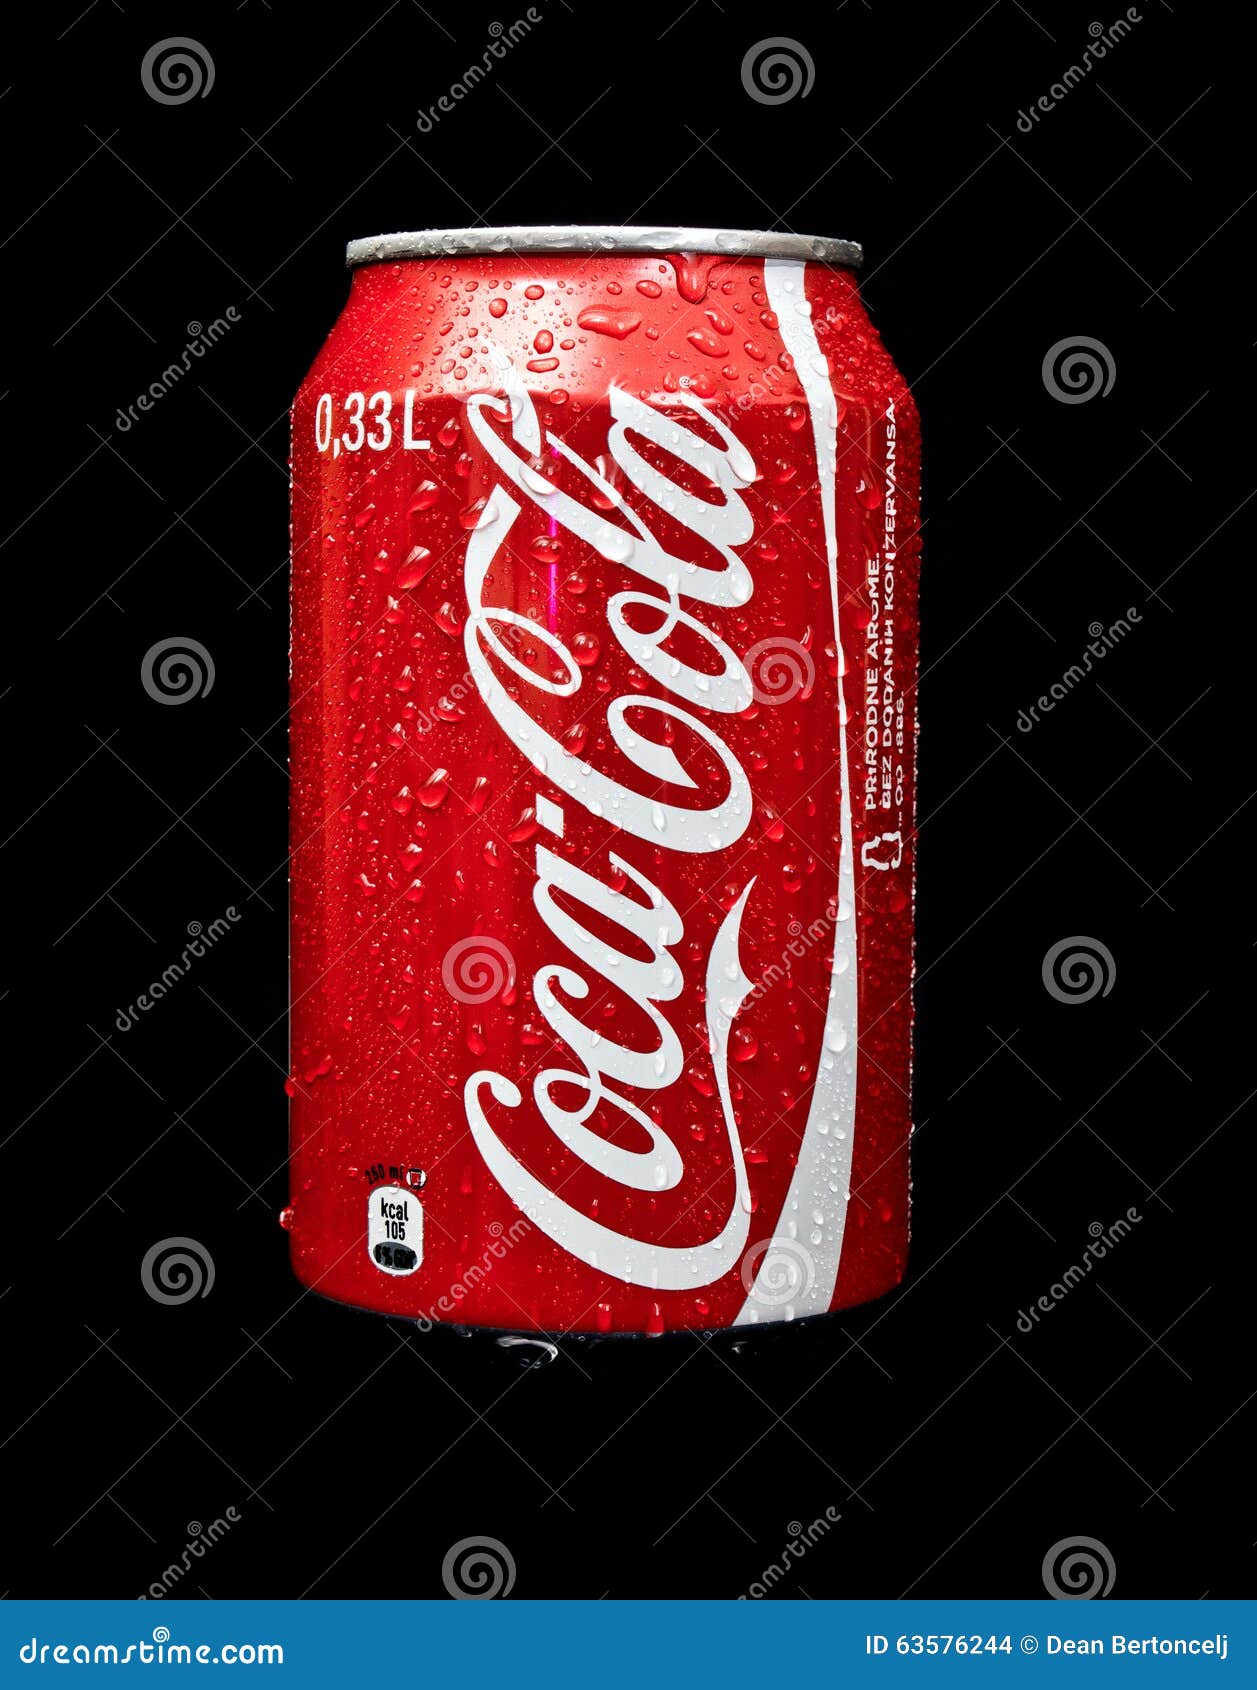 Coca cola editorial stock image. Image of brand, background - 63576244